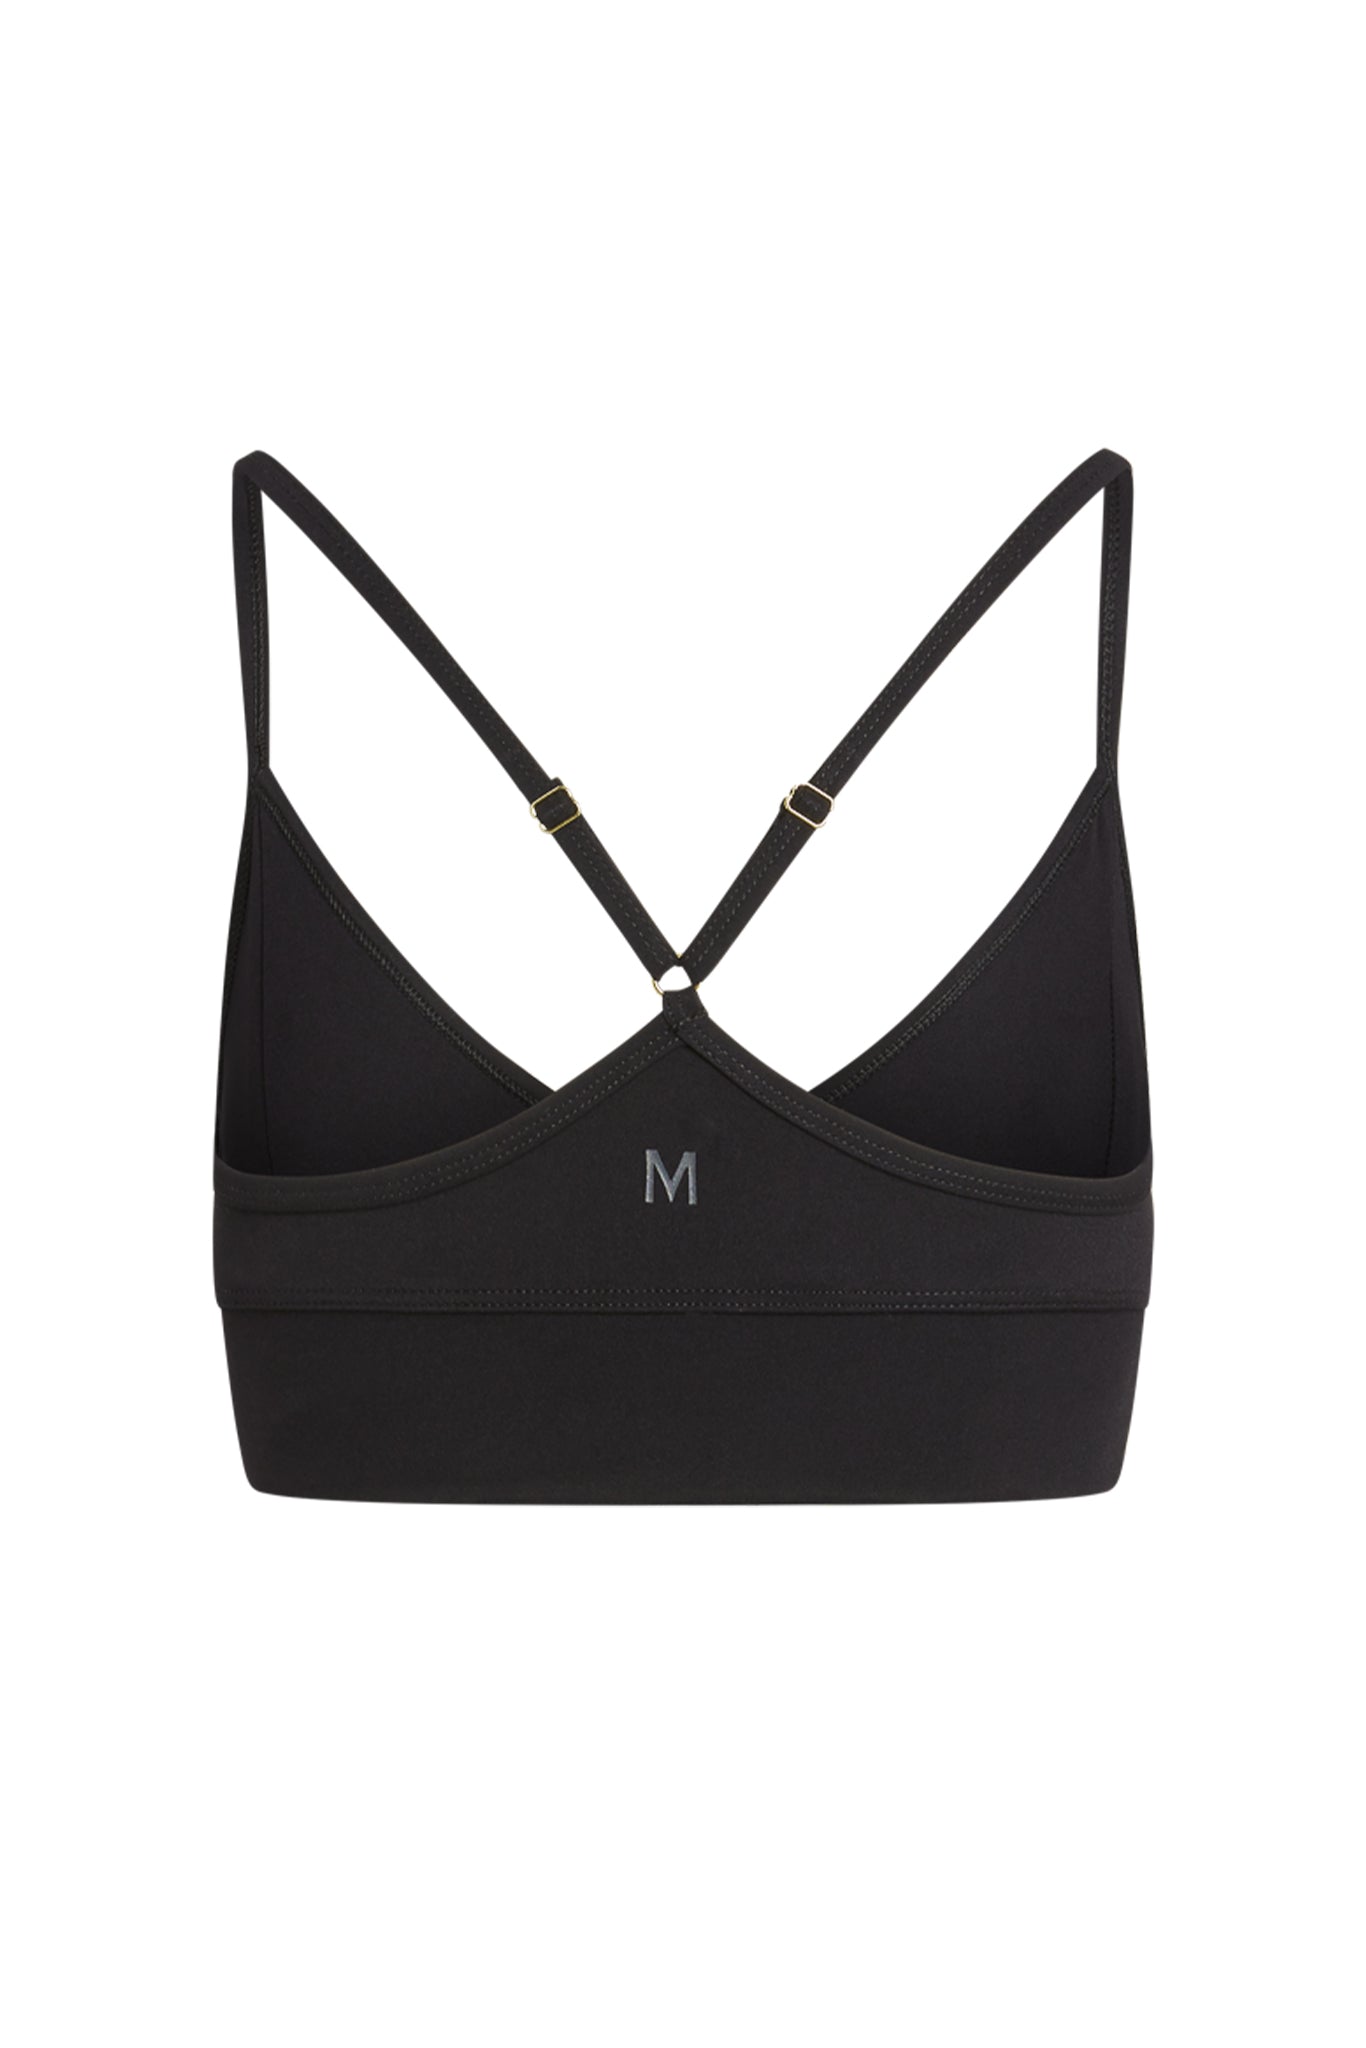 Can I Wear Sports Bra for Swimming? – SILVERWIND